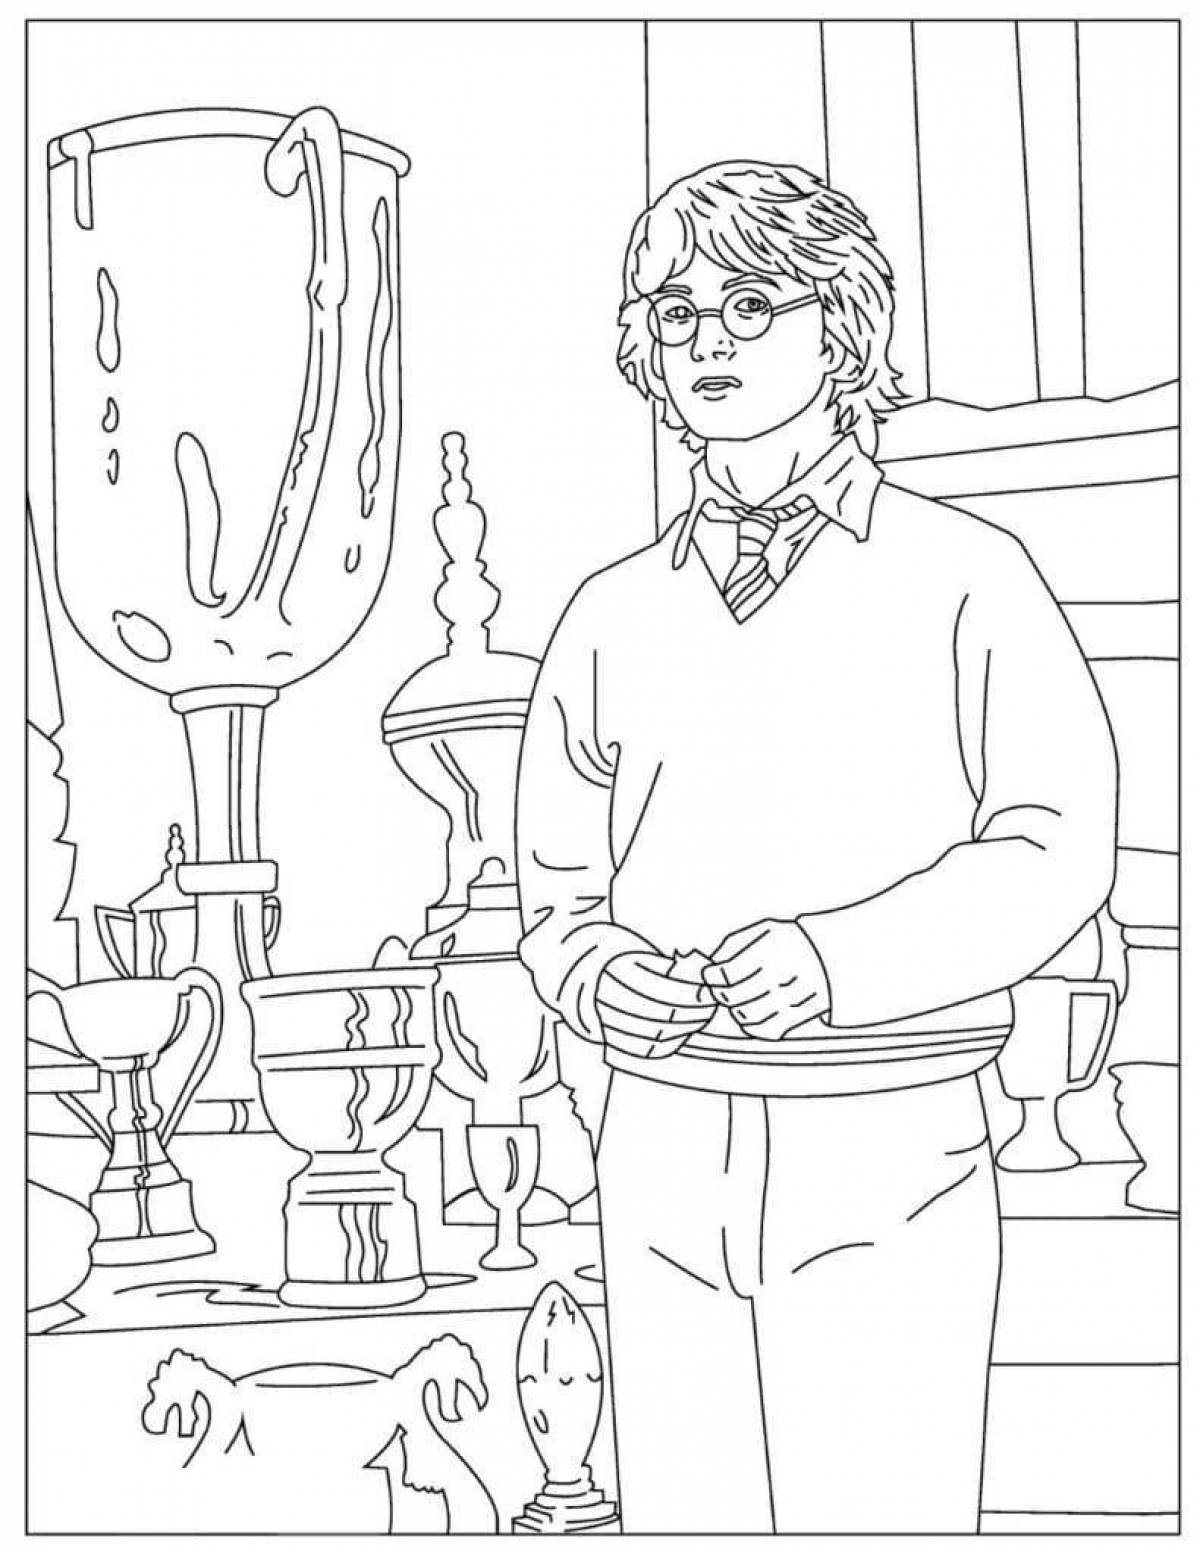 Exotic harry potter anime coloring book